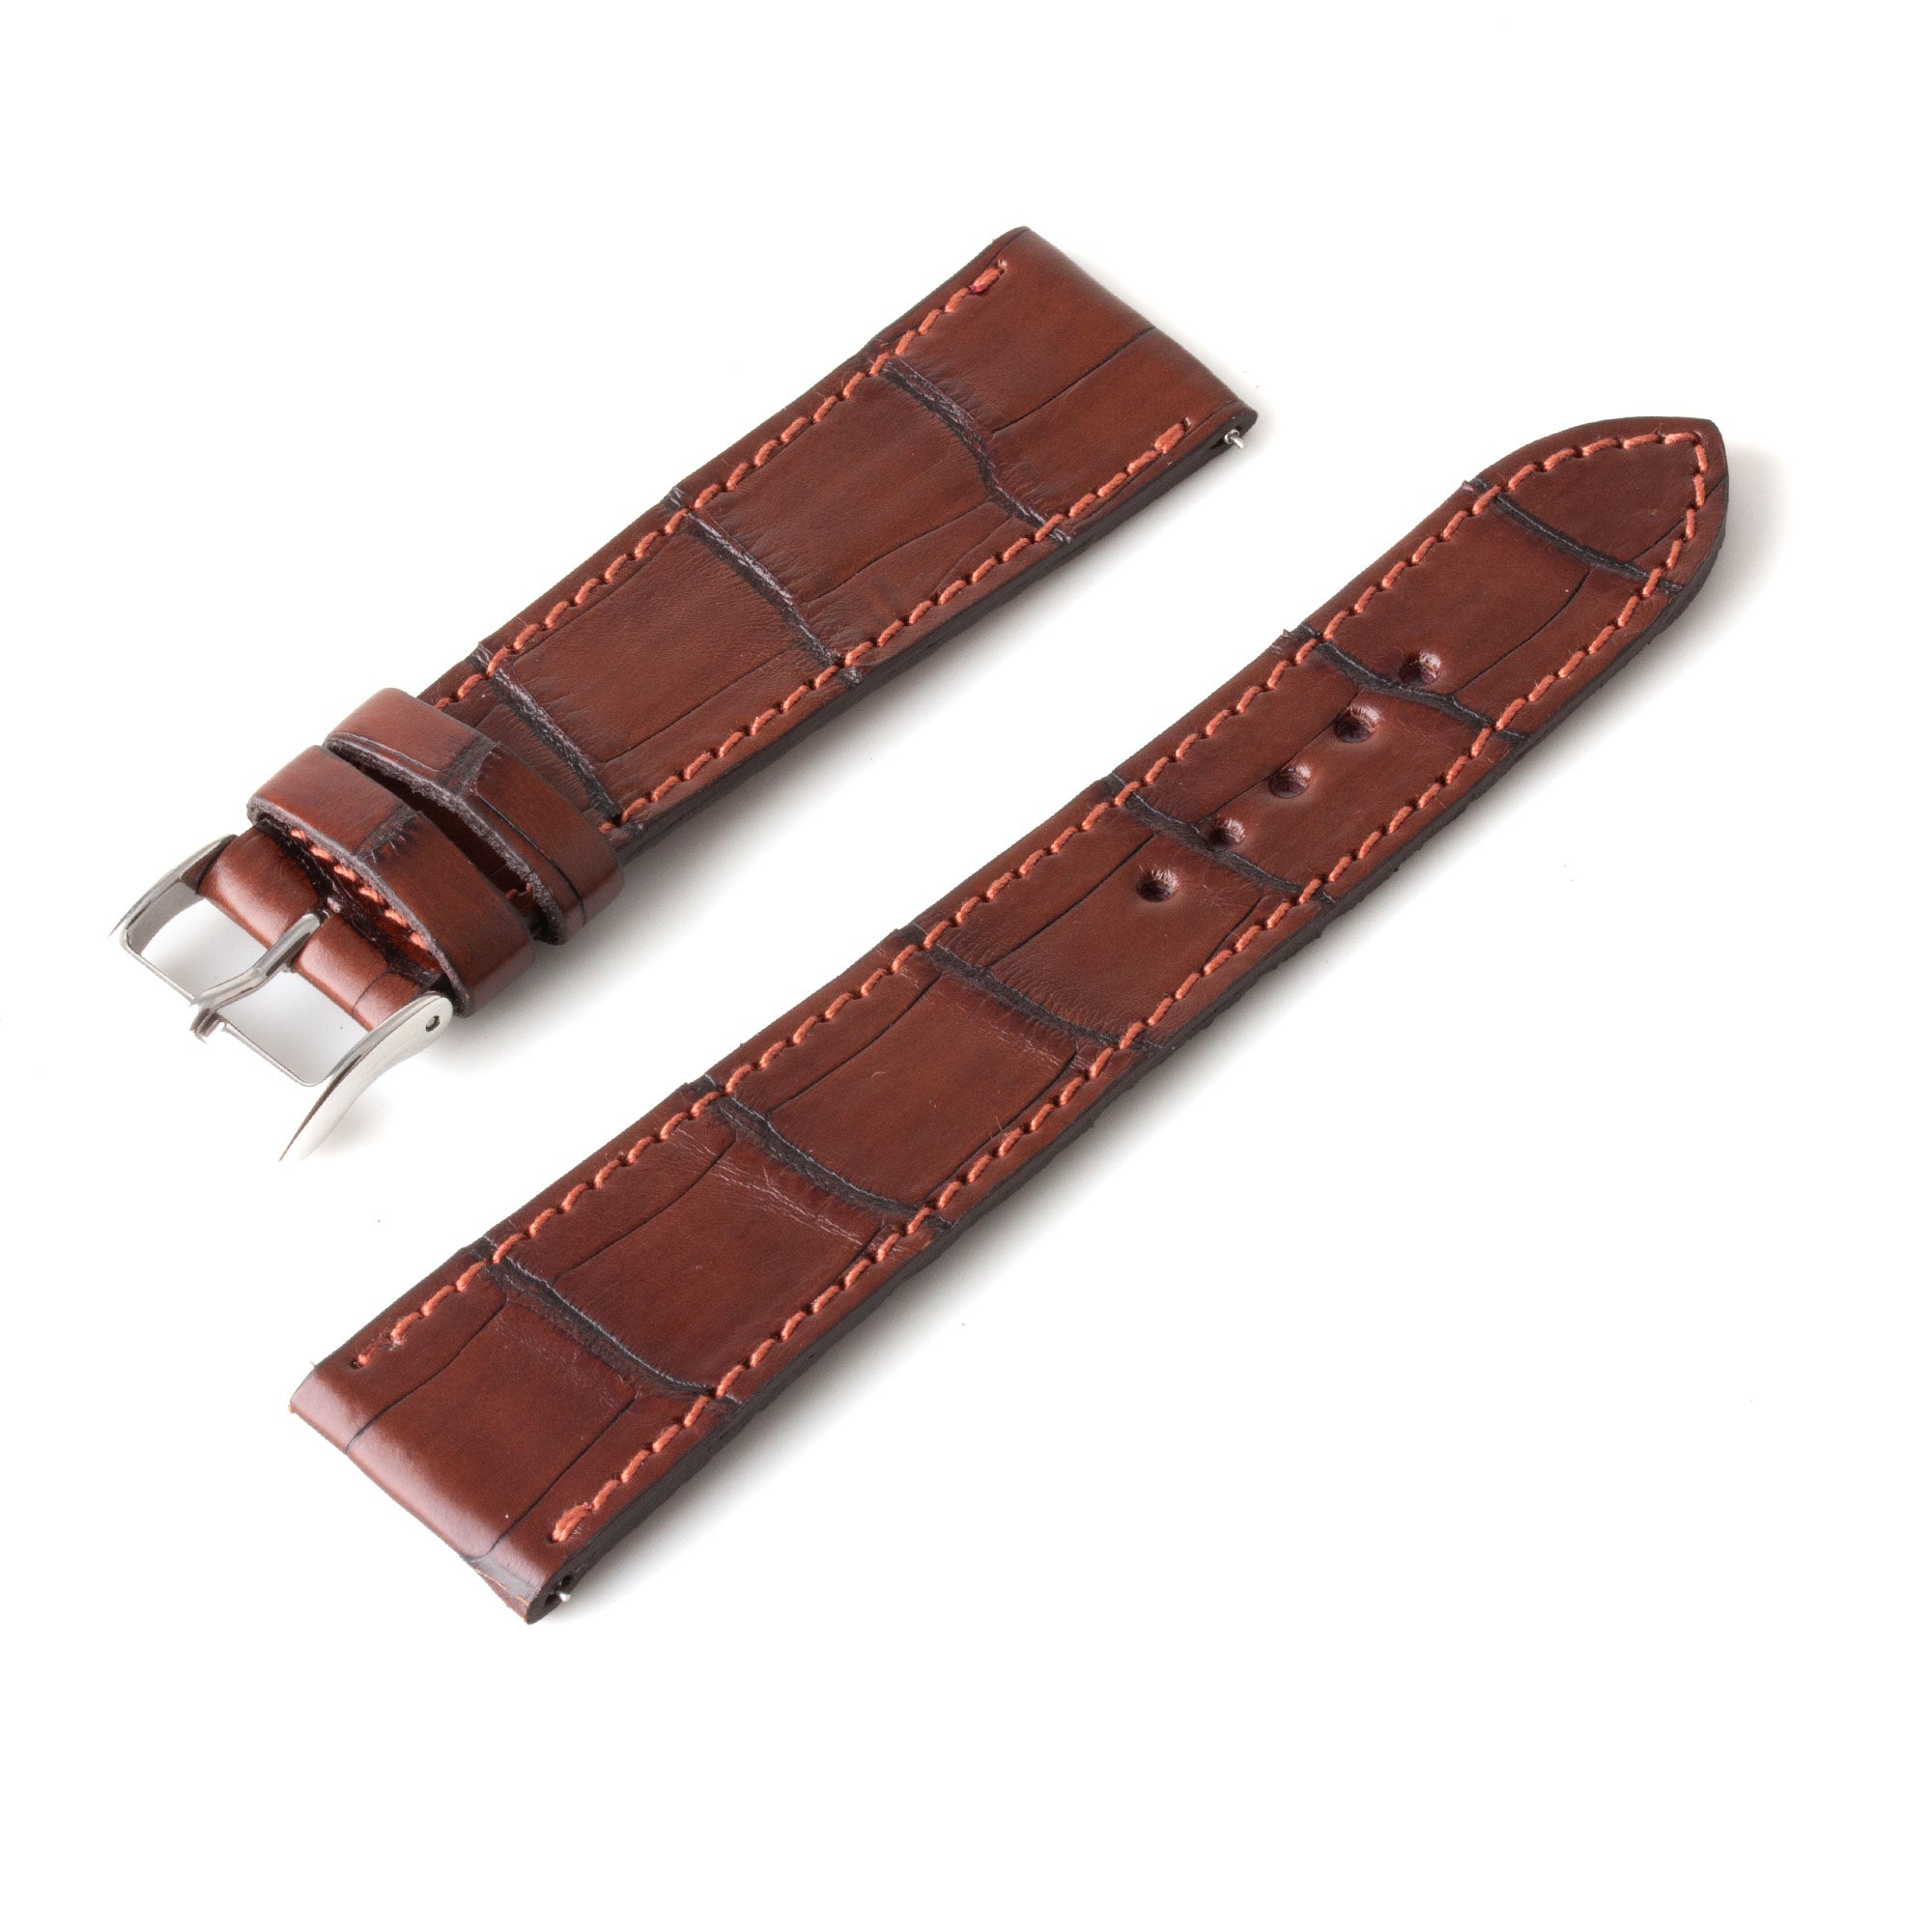 Alligator "Solo" leather watch band - 22mm width (0.87 inches) / Size M (n° 2)